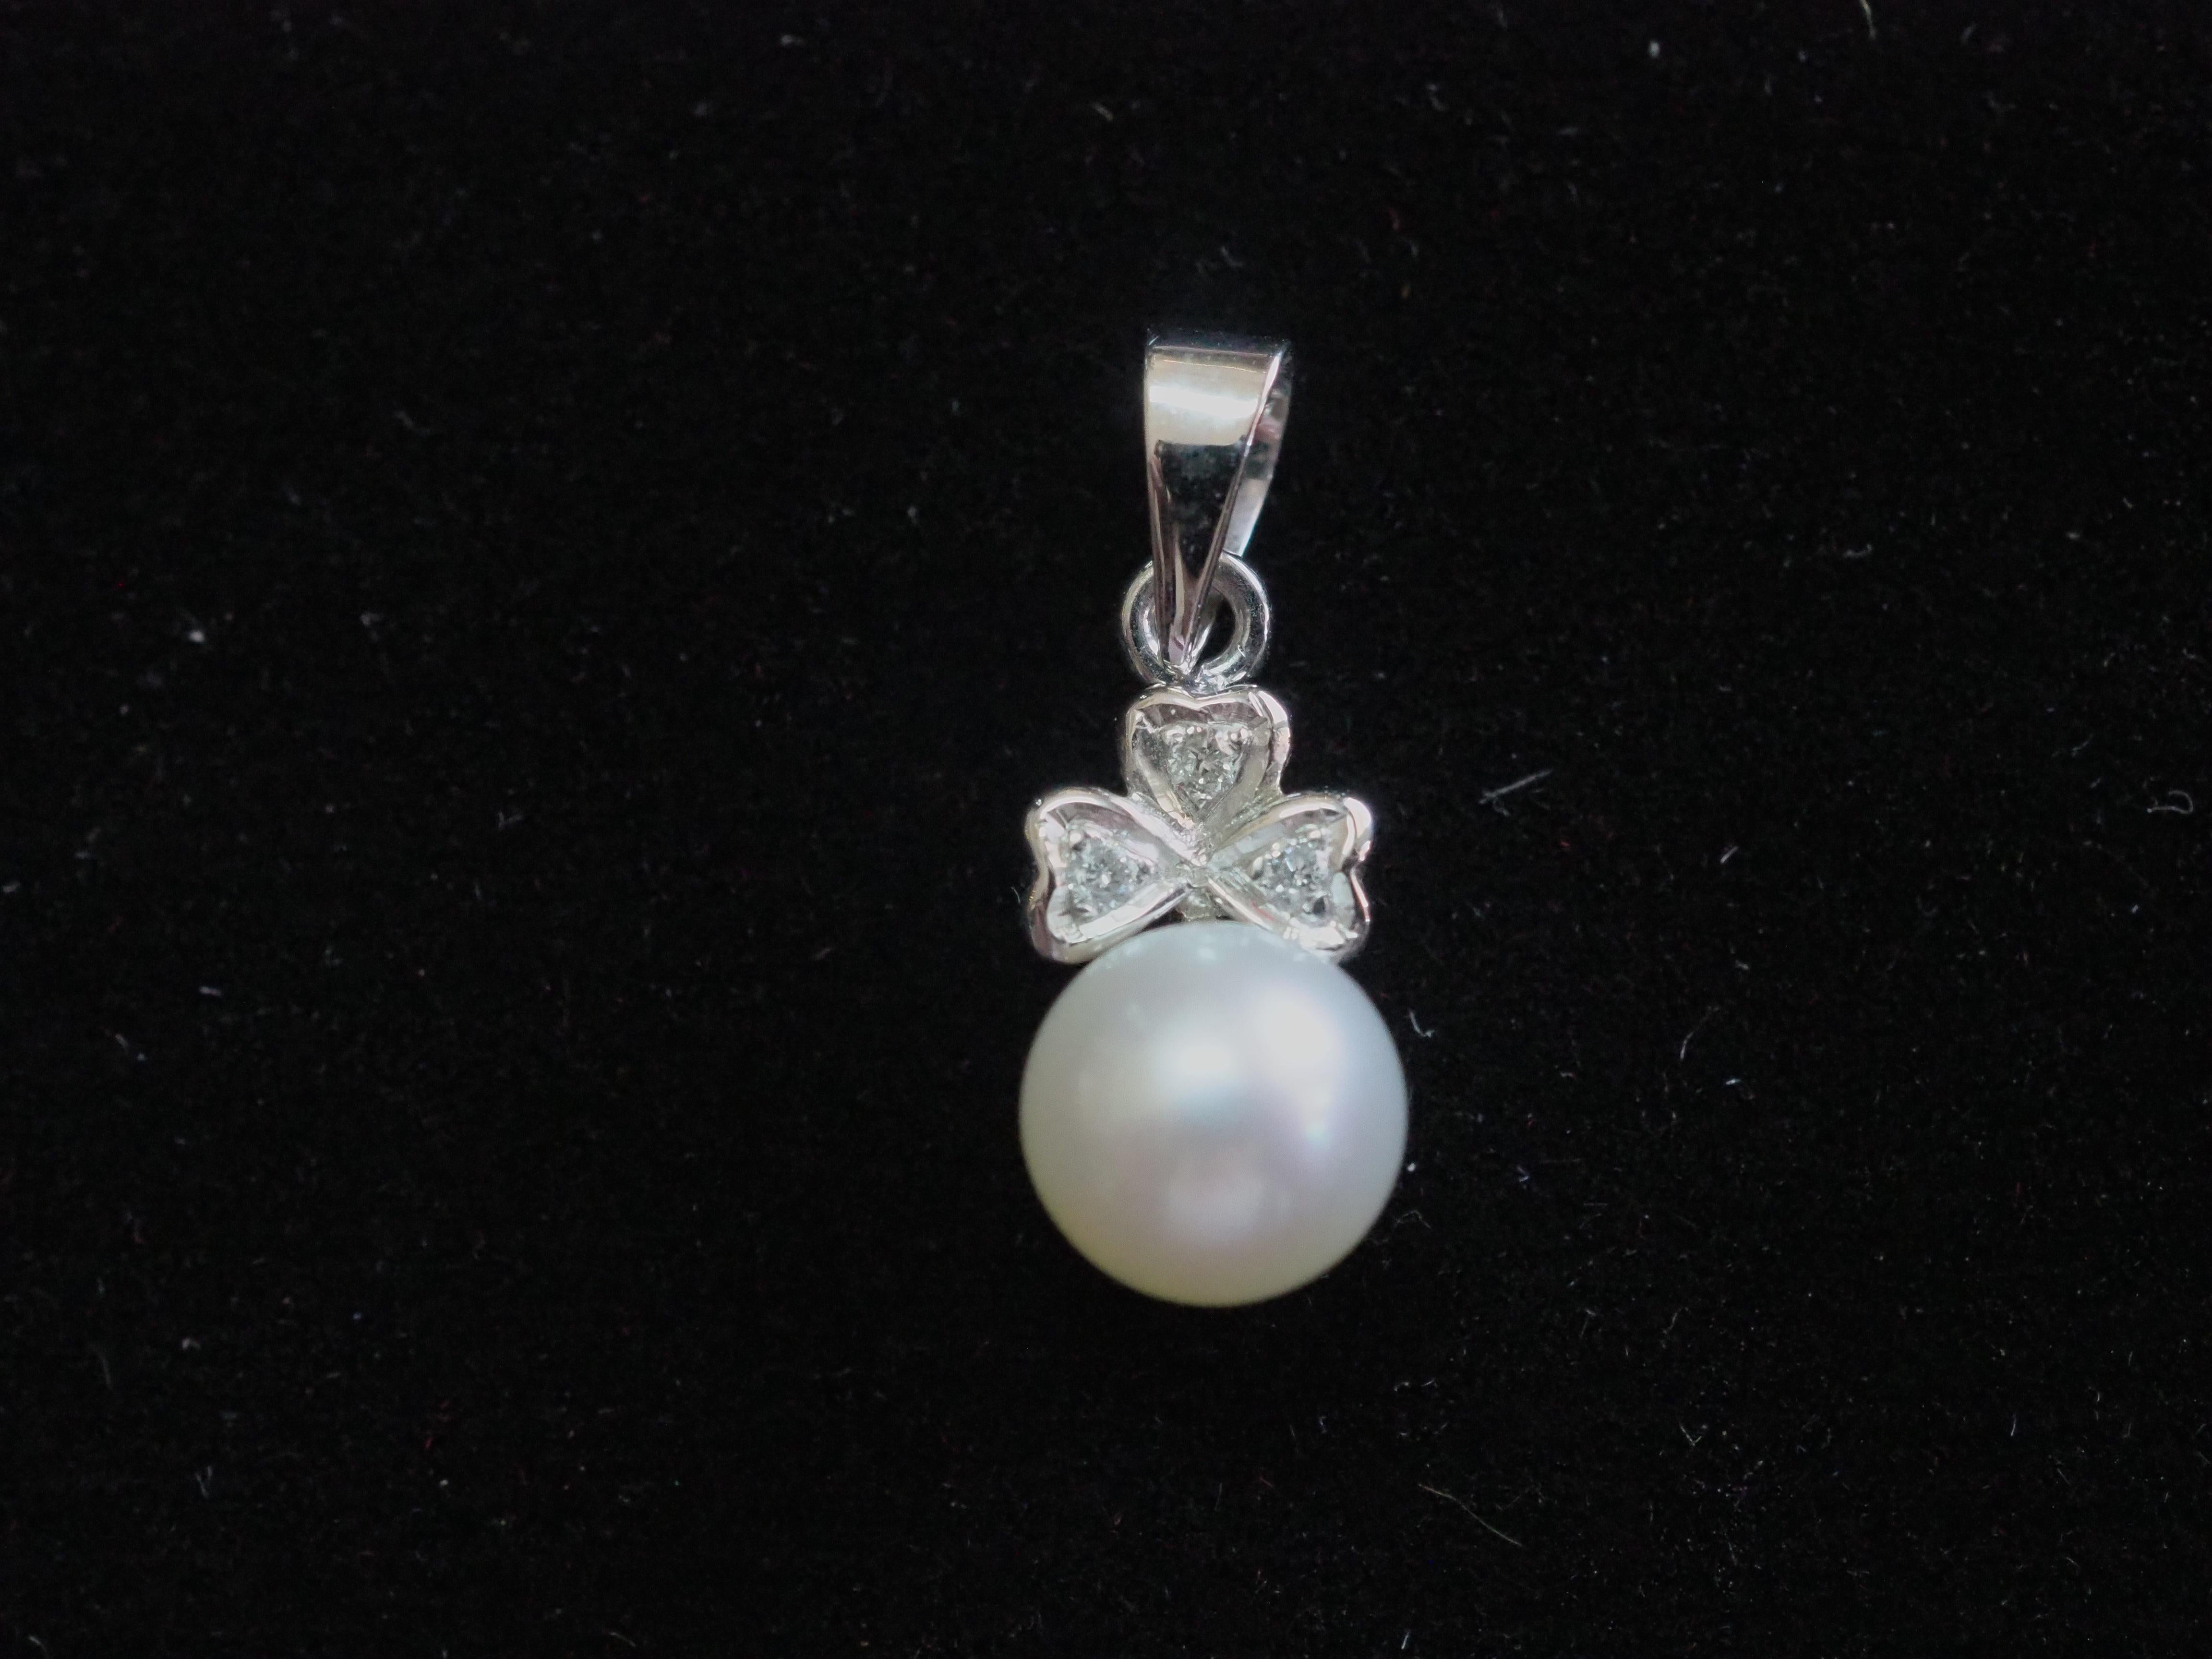 A beautiful and quality drop pendant enhancer. This beautiful piece is crafted using 18K white gold. The piece is adorned with a gorgeous 6.9mm sea pearl and with 0.03 carats of melee diamonds surrounding and icing over the white gold mounting. A